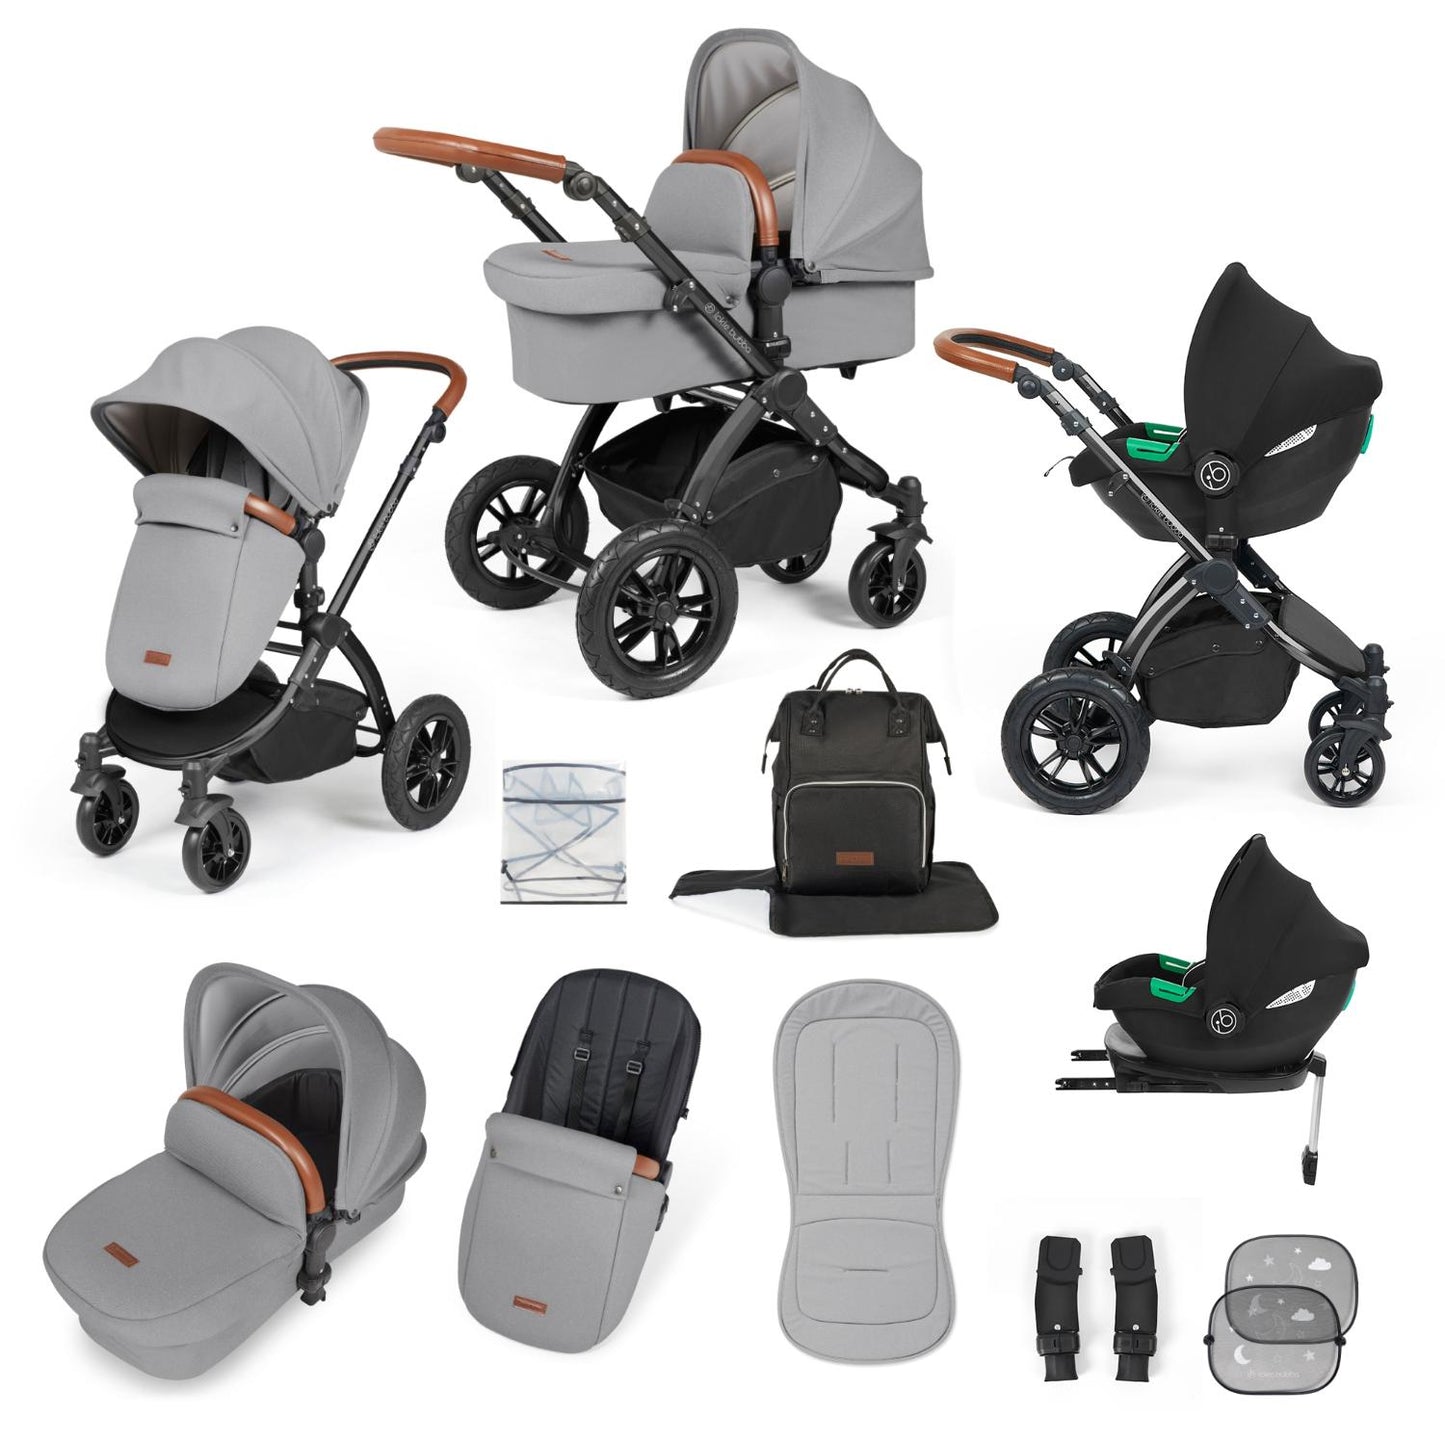 Ickle Bubba Stomp Luxe All-in-One Travel System with Cirrus i-Size Car Seat and ISOFIX Base and accessories in Pearl Grey colour with tan handle